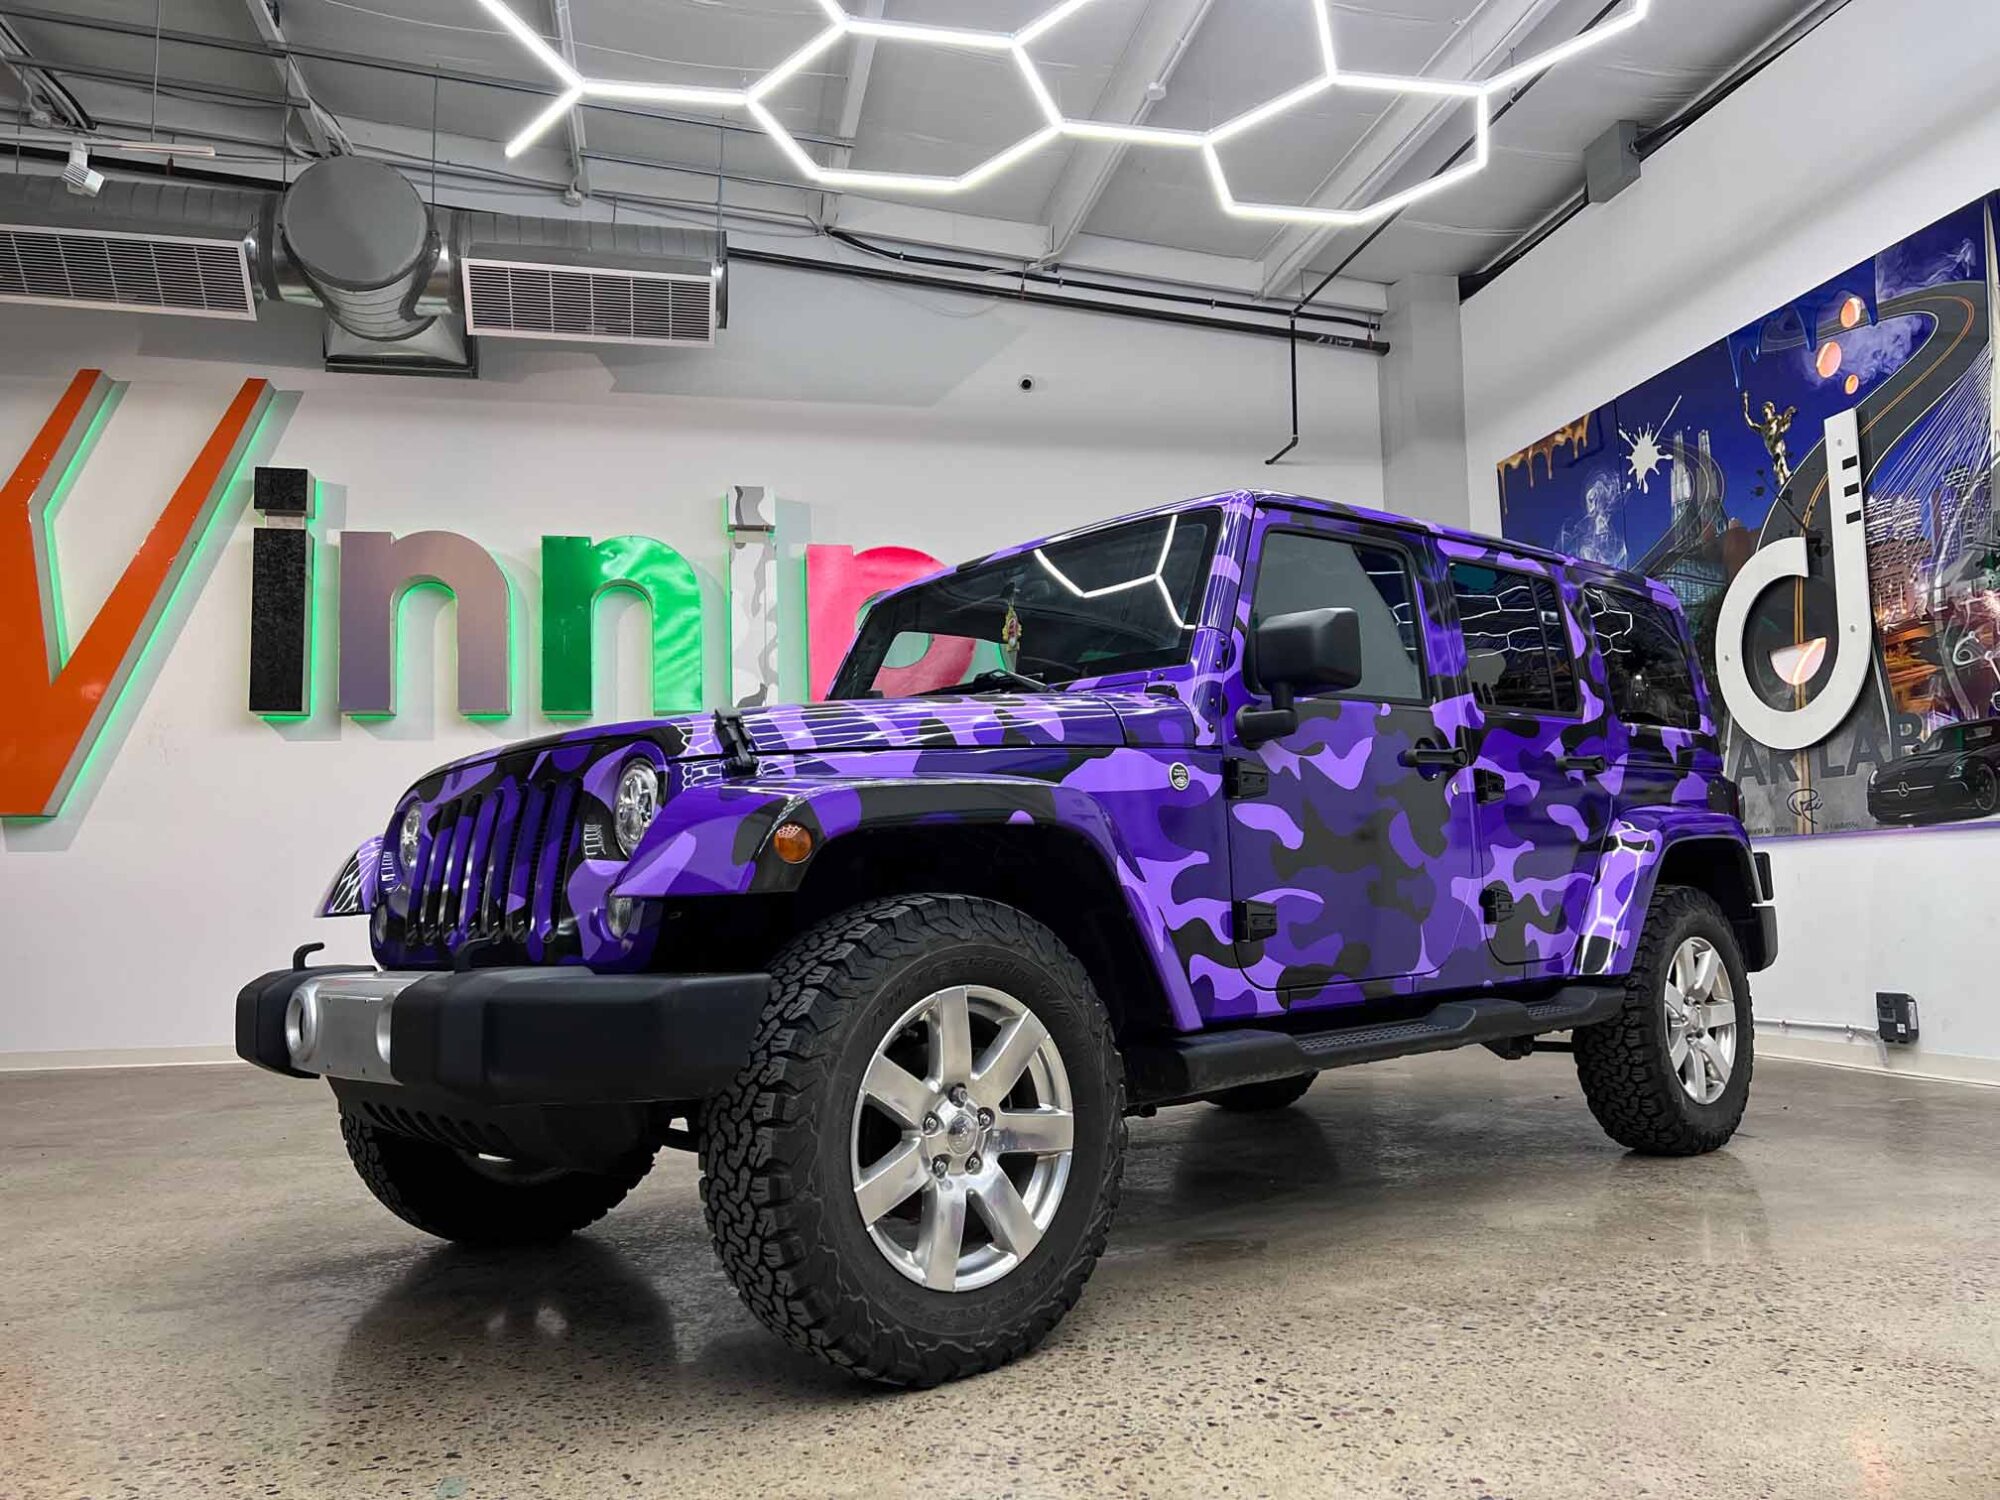 Jeep, camo Jeep, Business Graphics, Wrap Price, Winnipeg Wrap Price, Wrap Prices Winnipeg, Best Vinyl Wraps Winnipeg, Winnipegs Best Wraps, Wrap, Wrapped, Wrapping, Wrappers